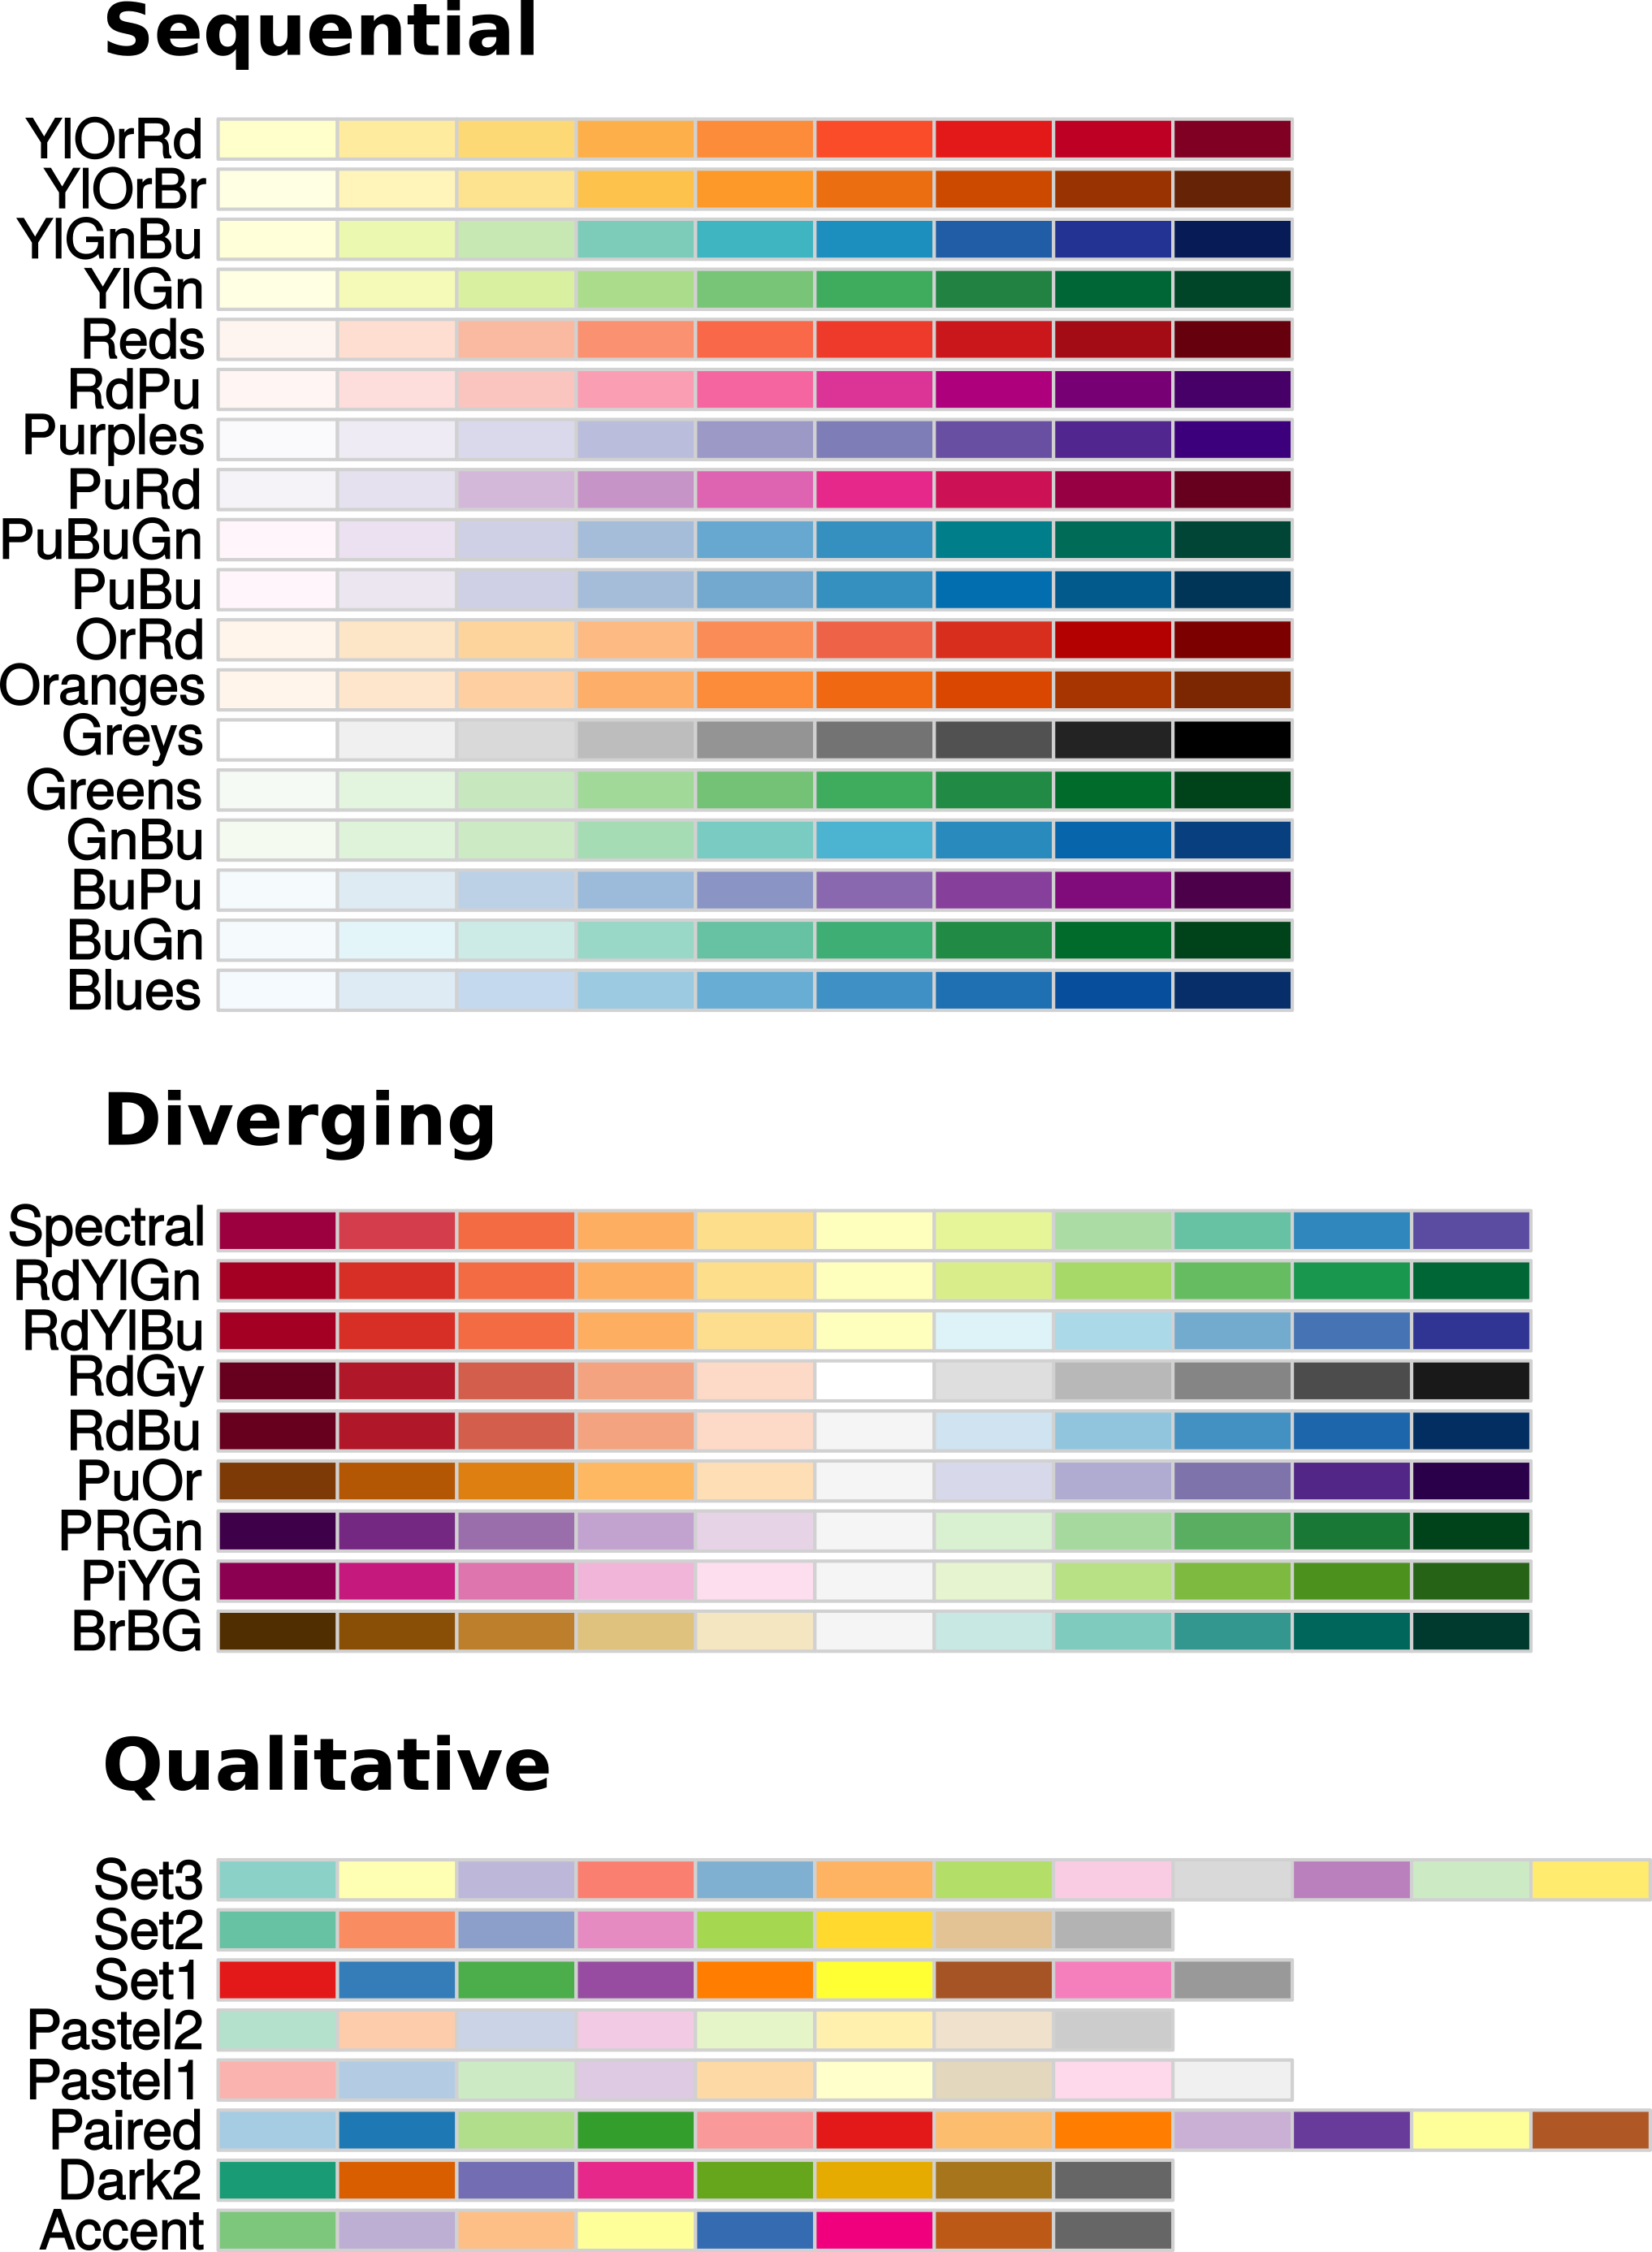 Sequential, diverging, and qualitative ColorBrewer scales, using the maximal number of colors available in each scale